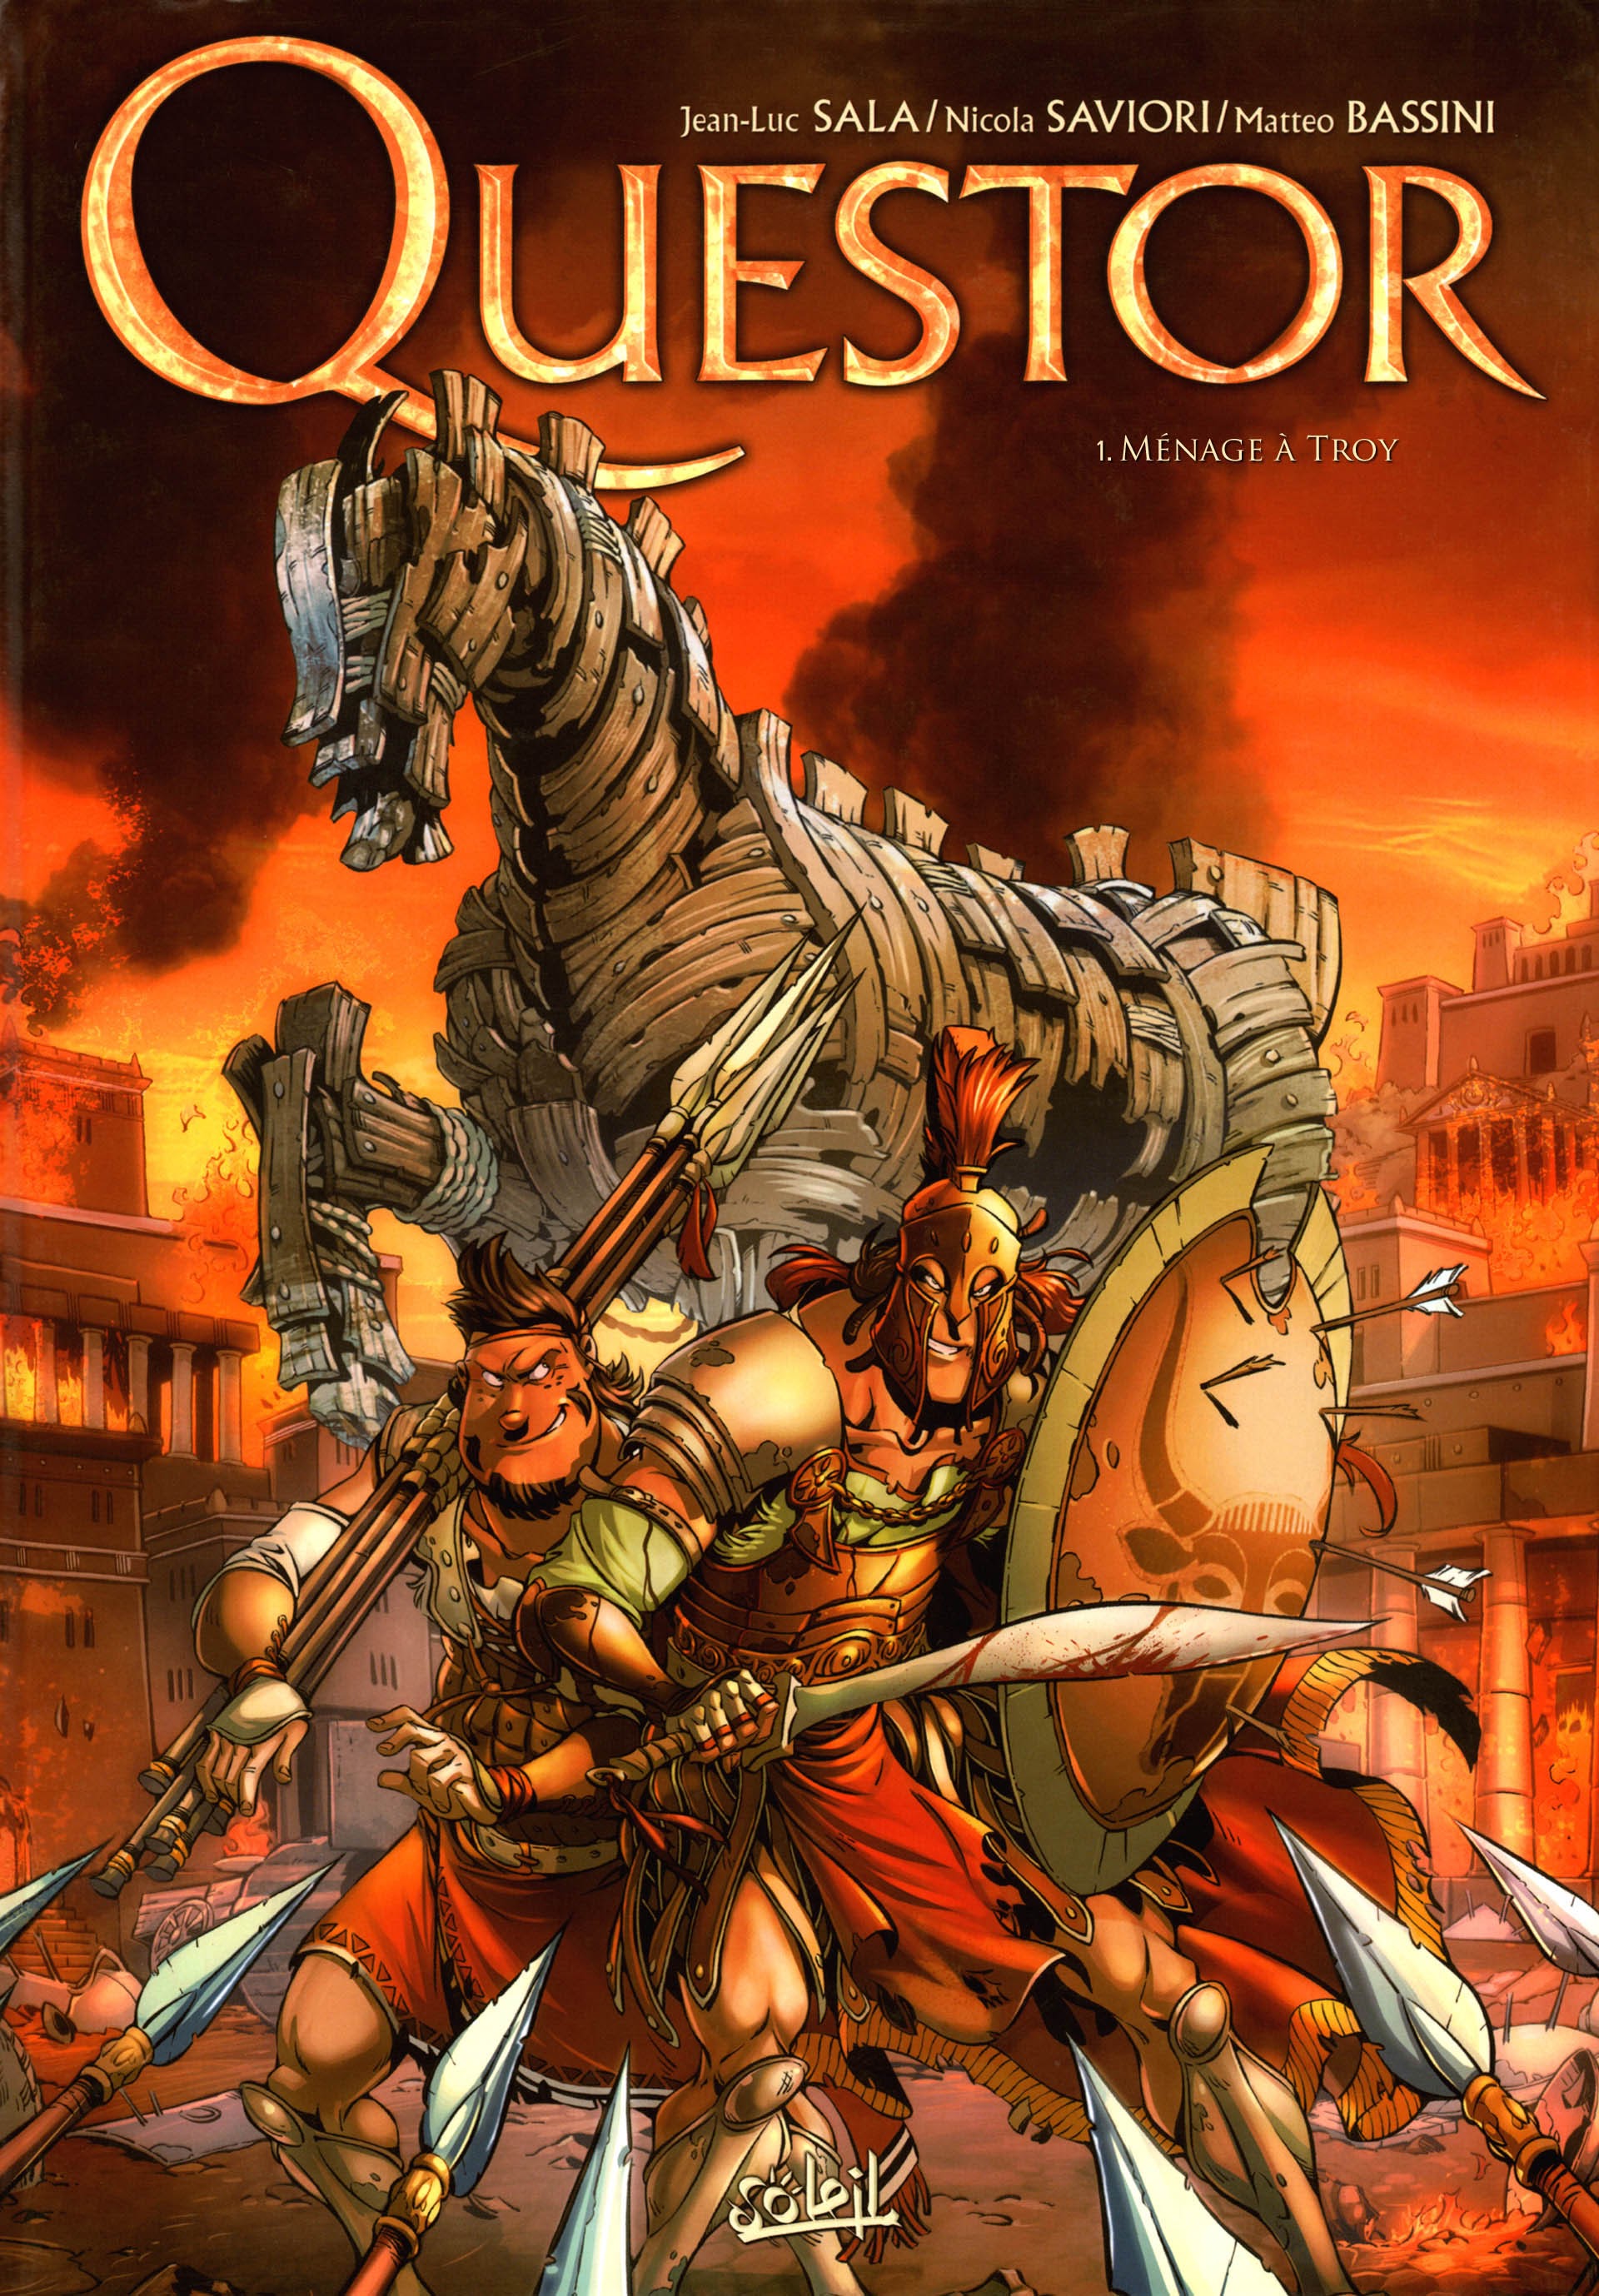 Read online Questor comic -  Issue #1 - 1